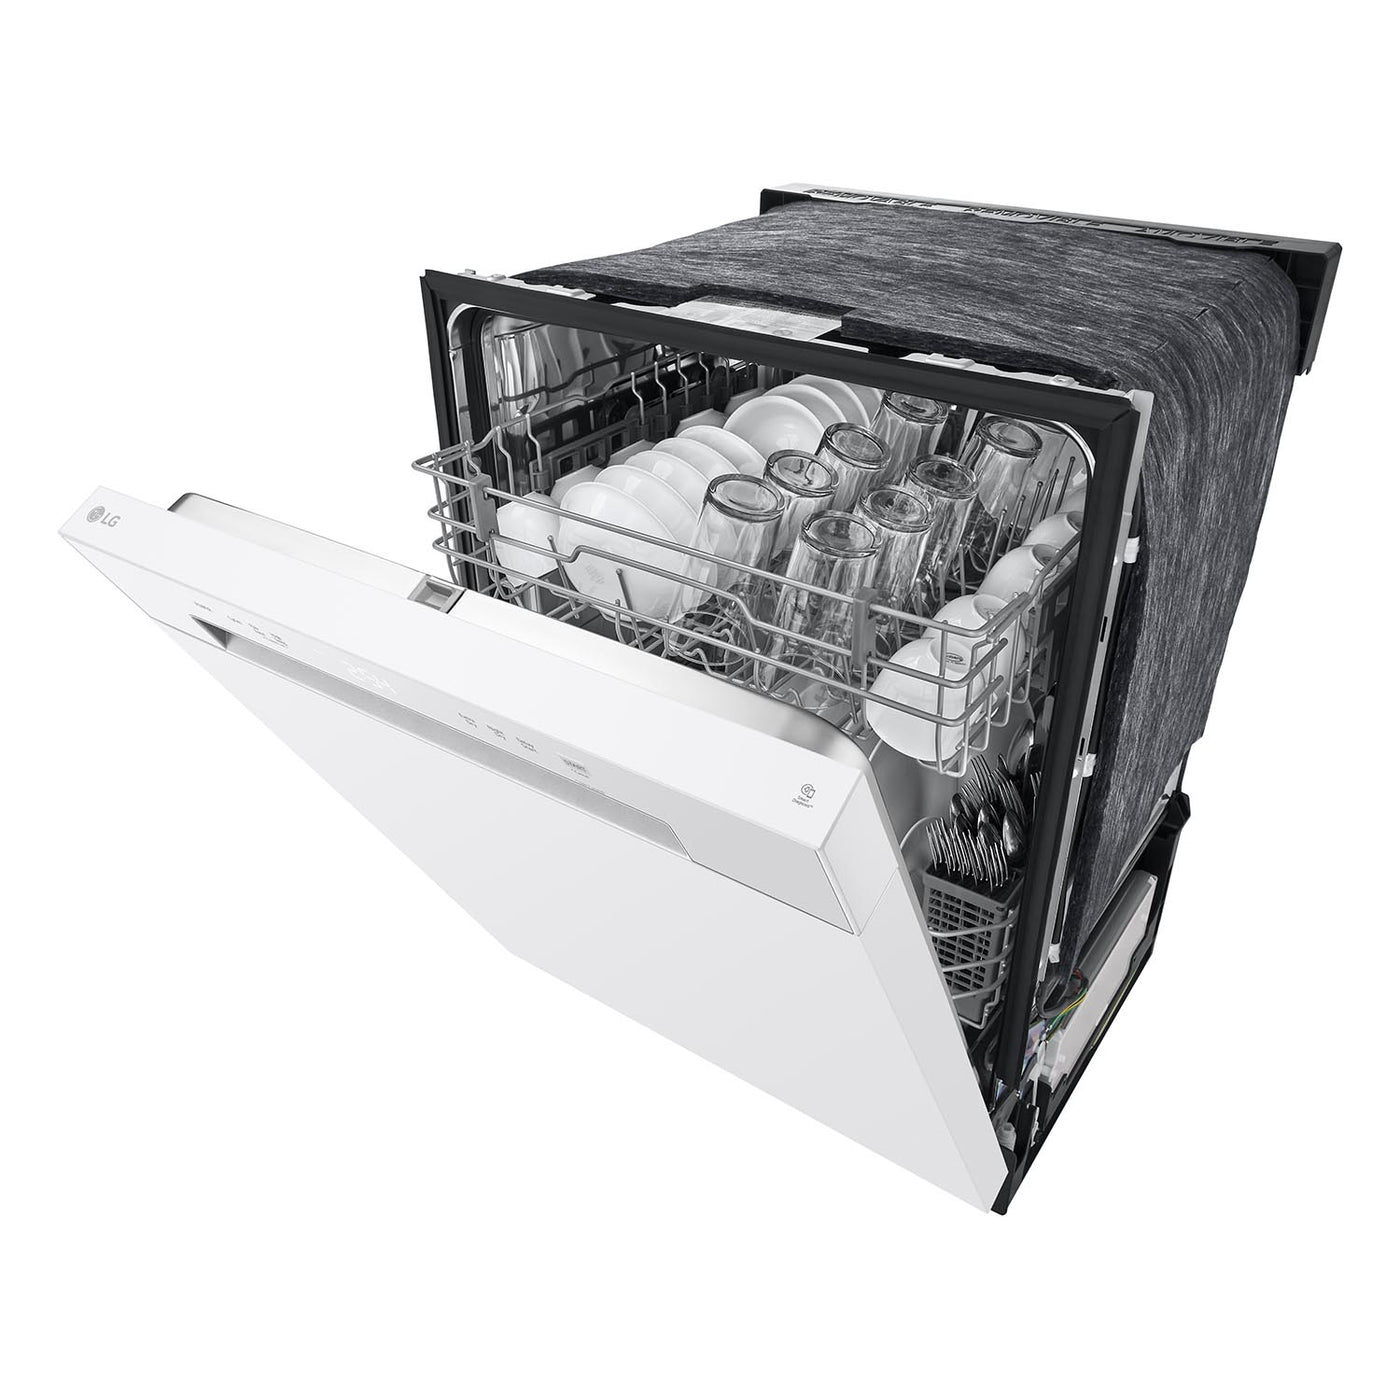 LG White Dishwasher with SenseClean™ and Dynamic Dry™ - LDFC2423W